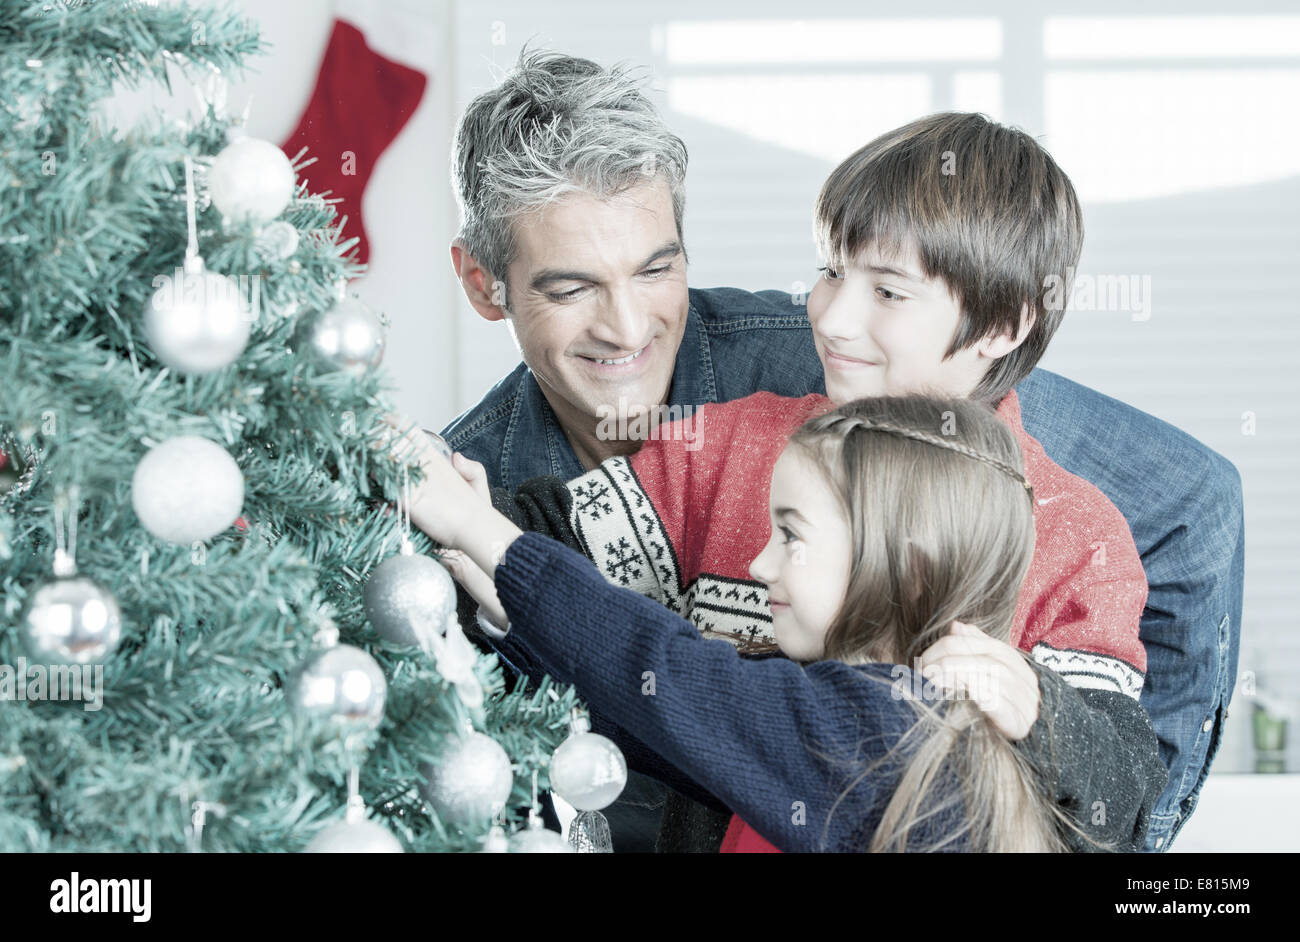 Father with son and daughter decorating Christmas tree. Family Christmas concept. Stock Photo